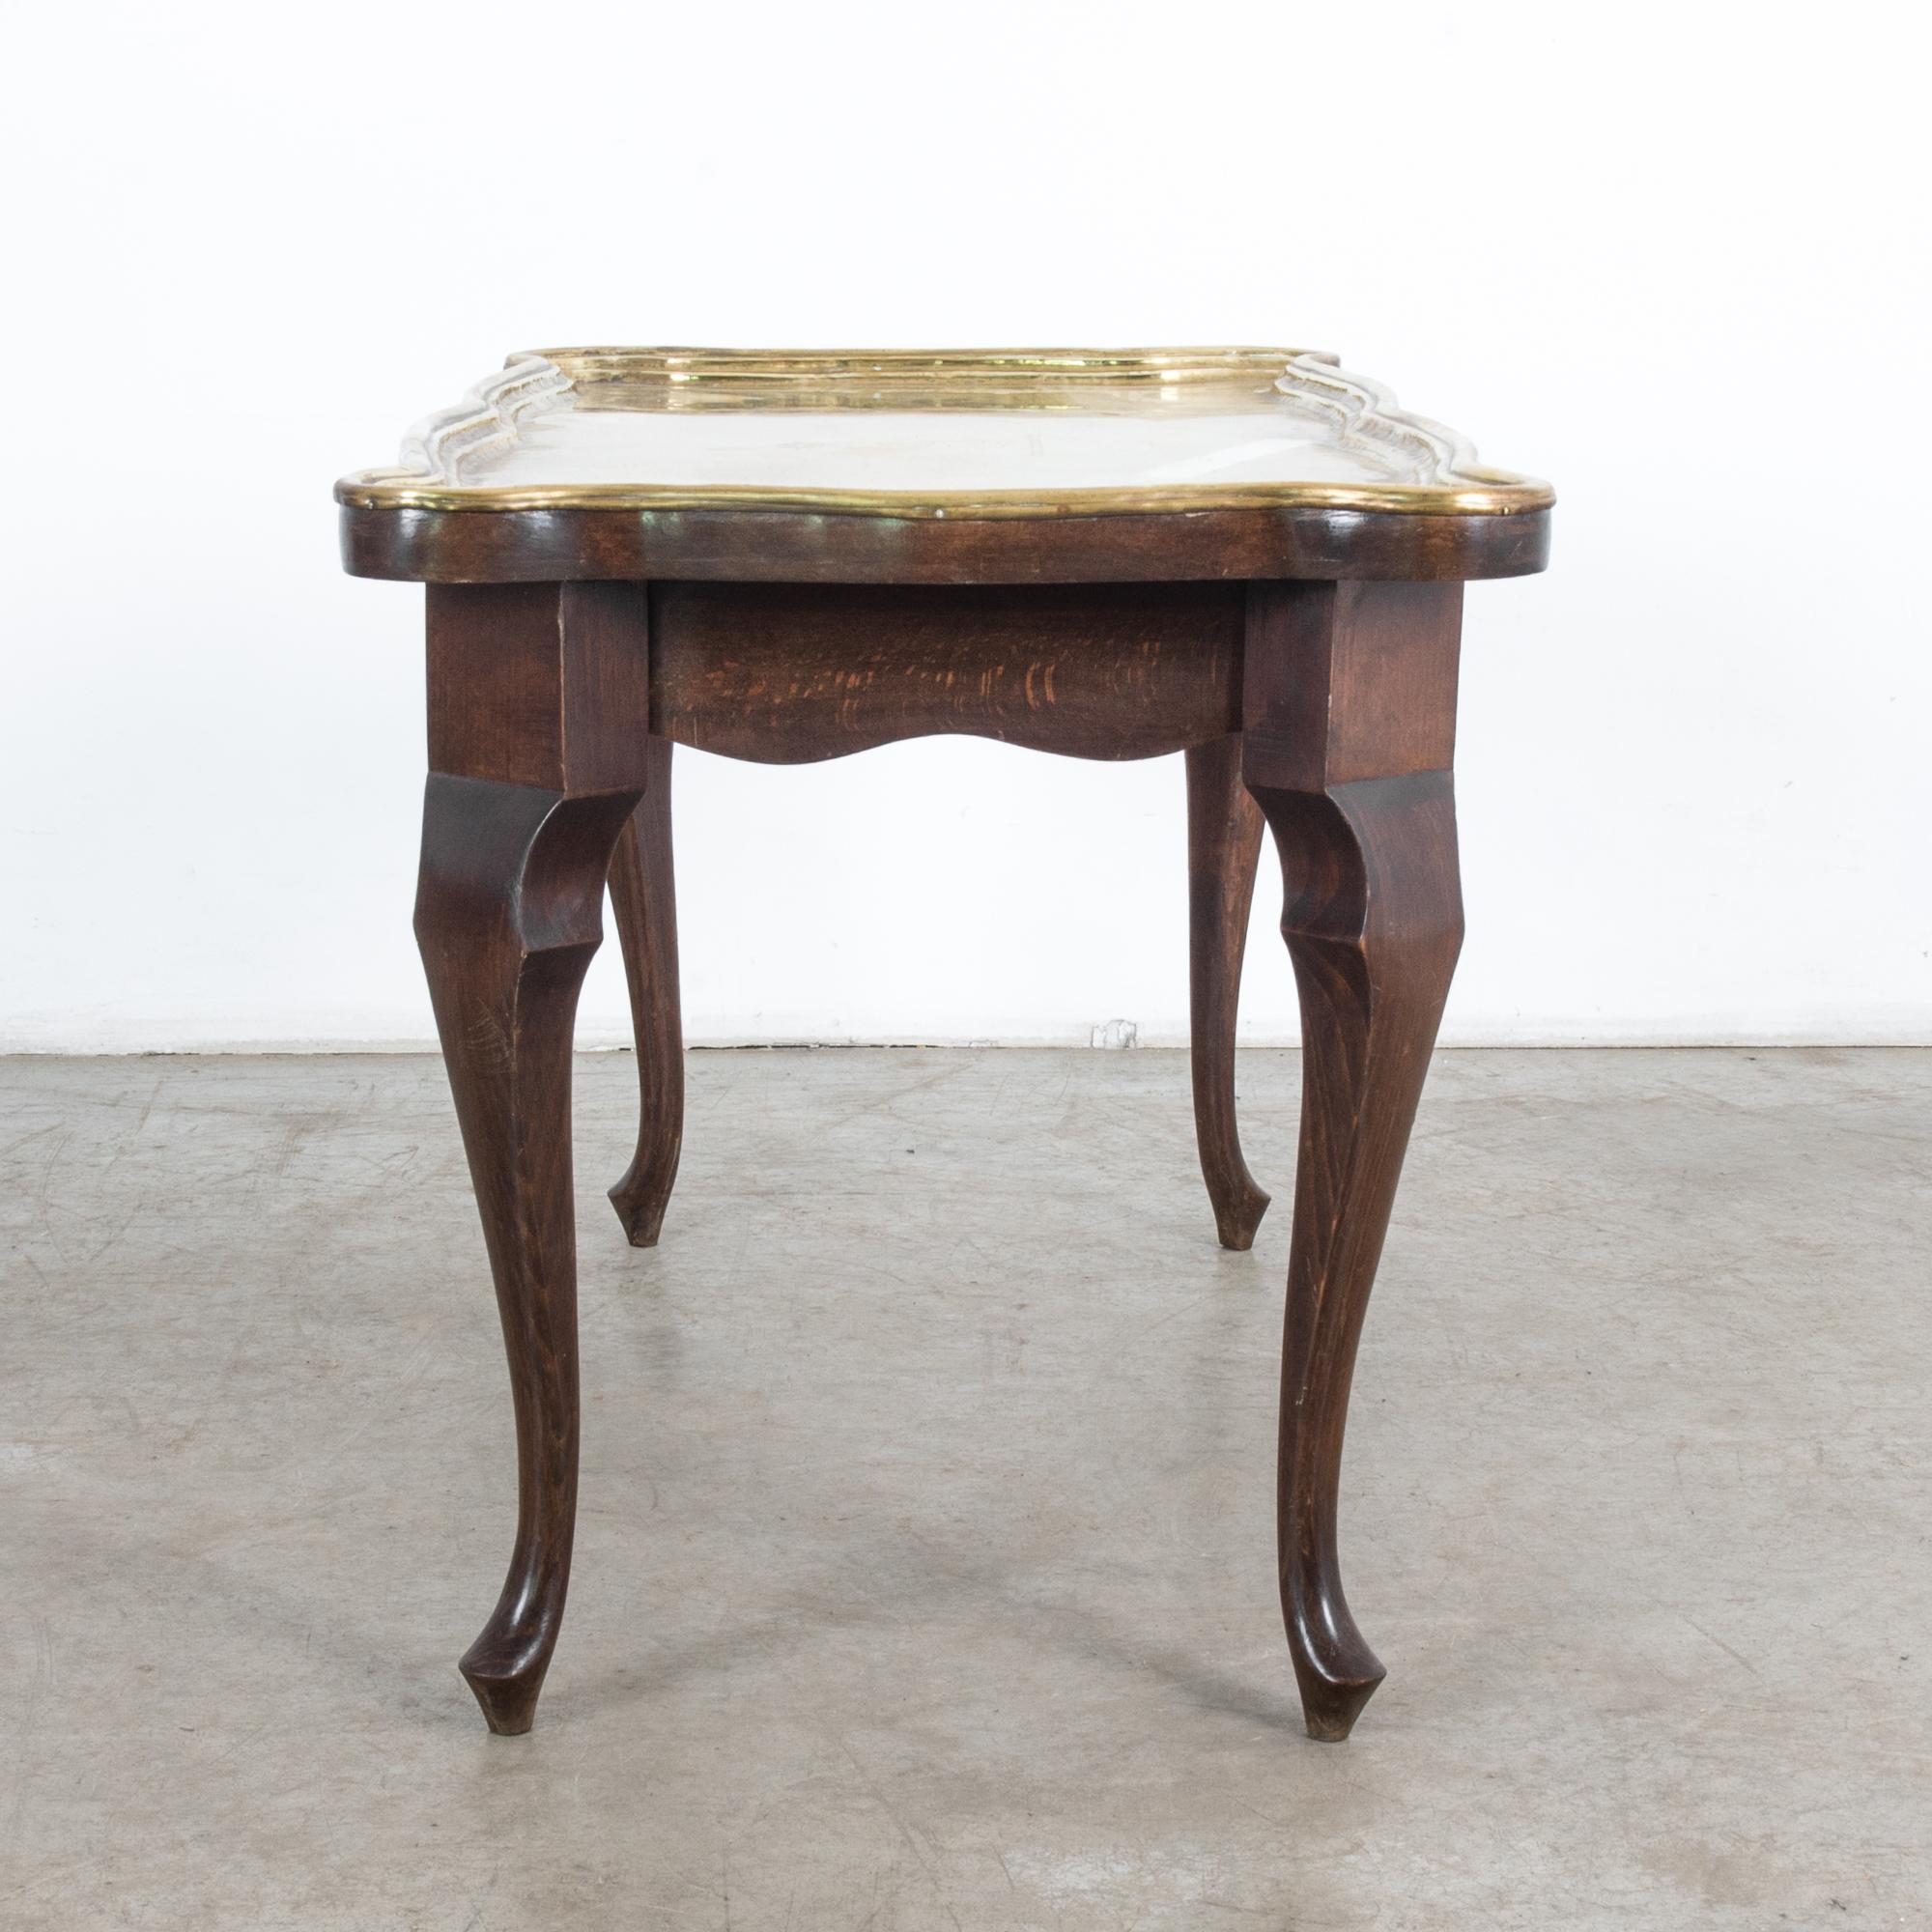 Mid-20th Century Oak Coffee Table with Brass Top, Germany, circa 1959